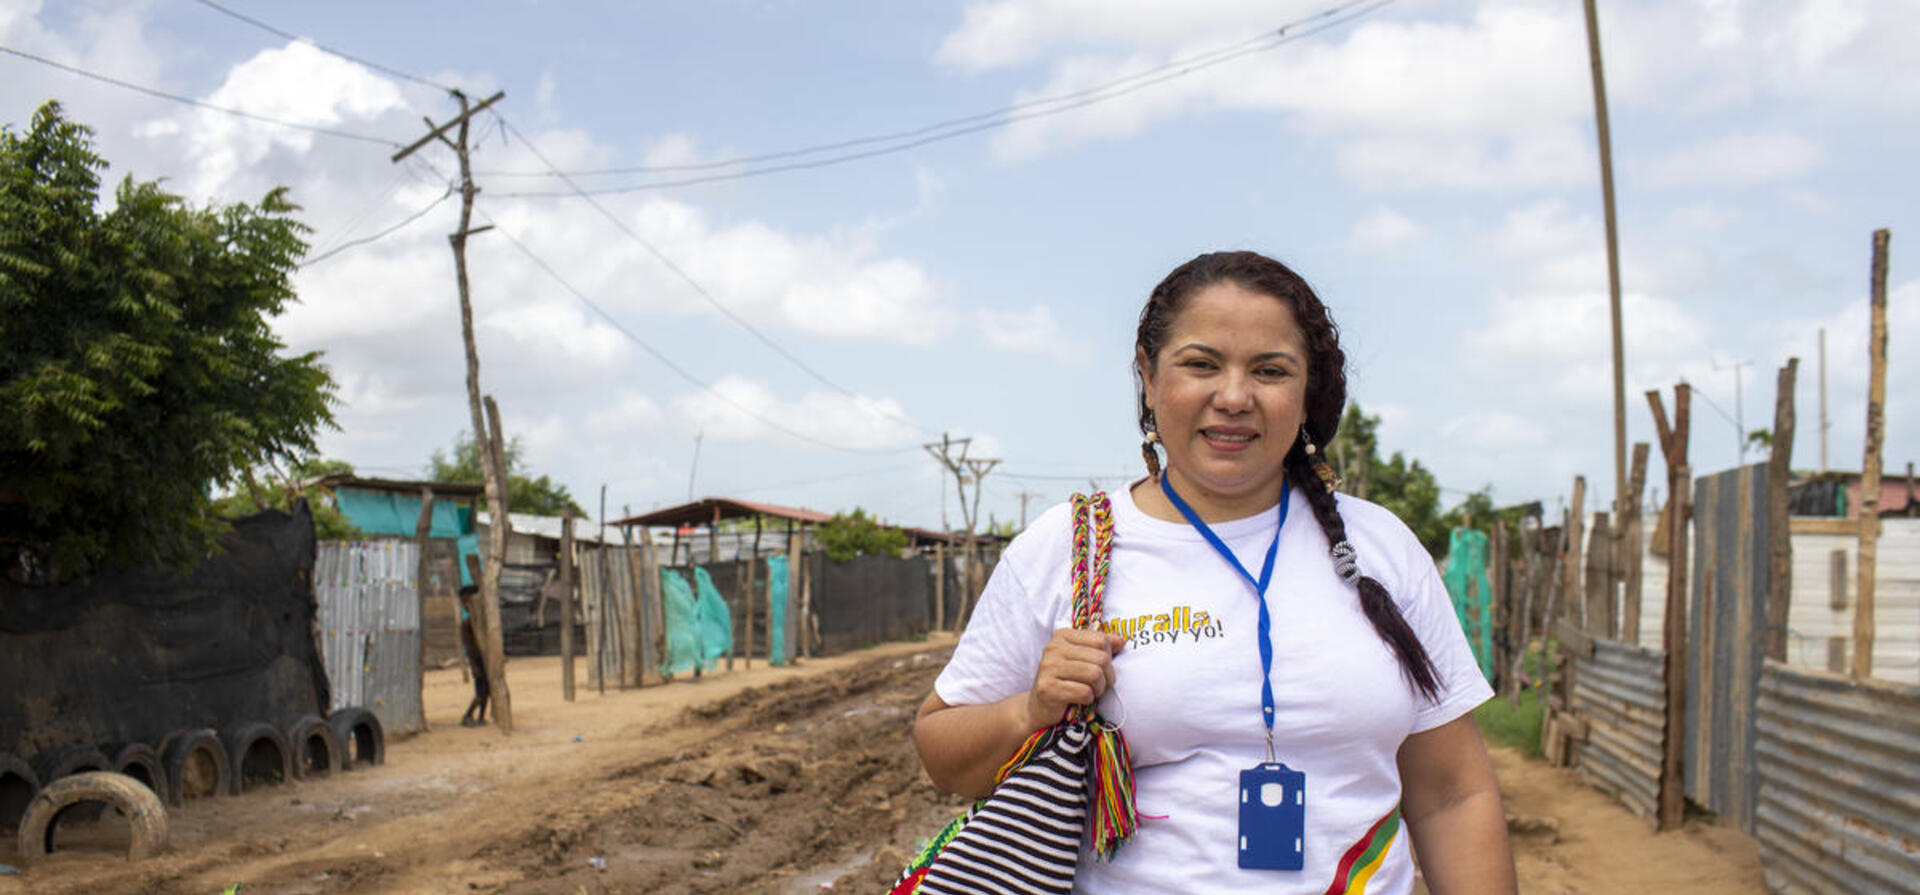 Colombian woman devotes life to helping sexually exploited children heal UNHCR photo image